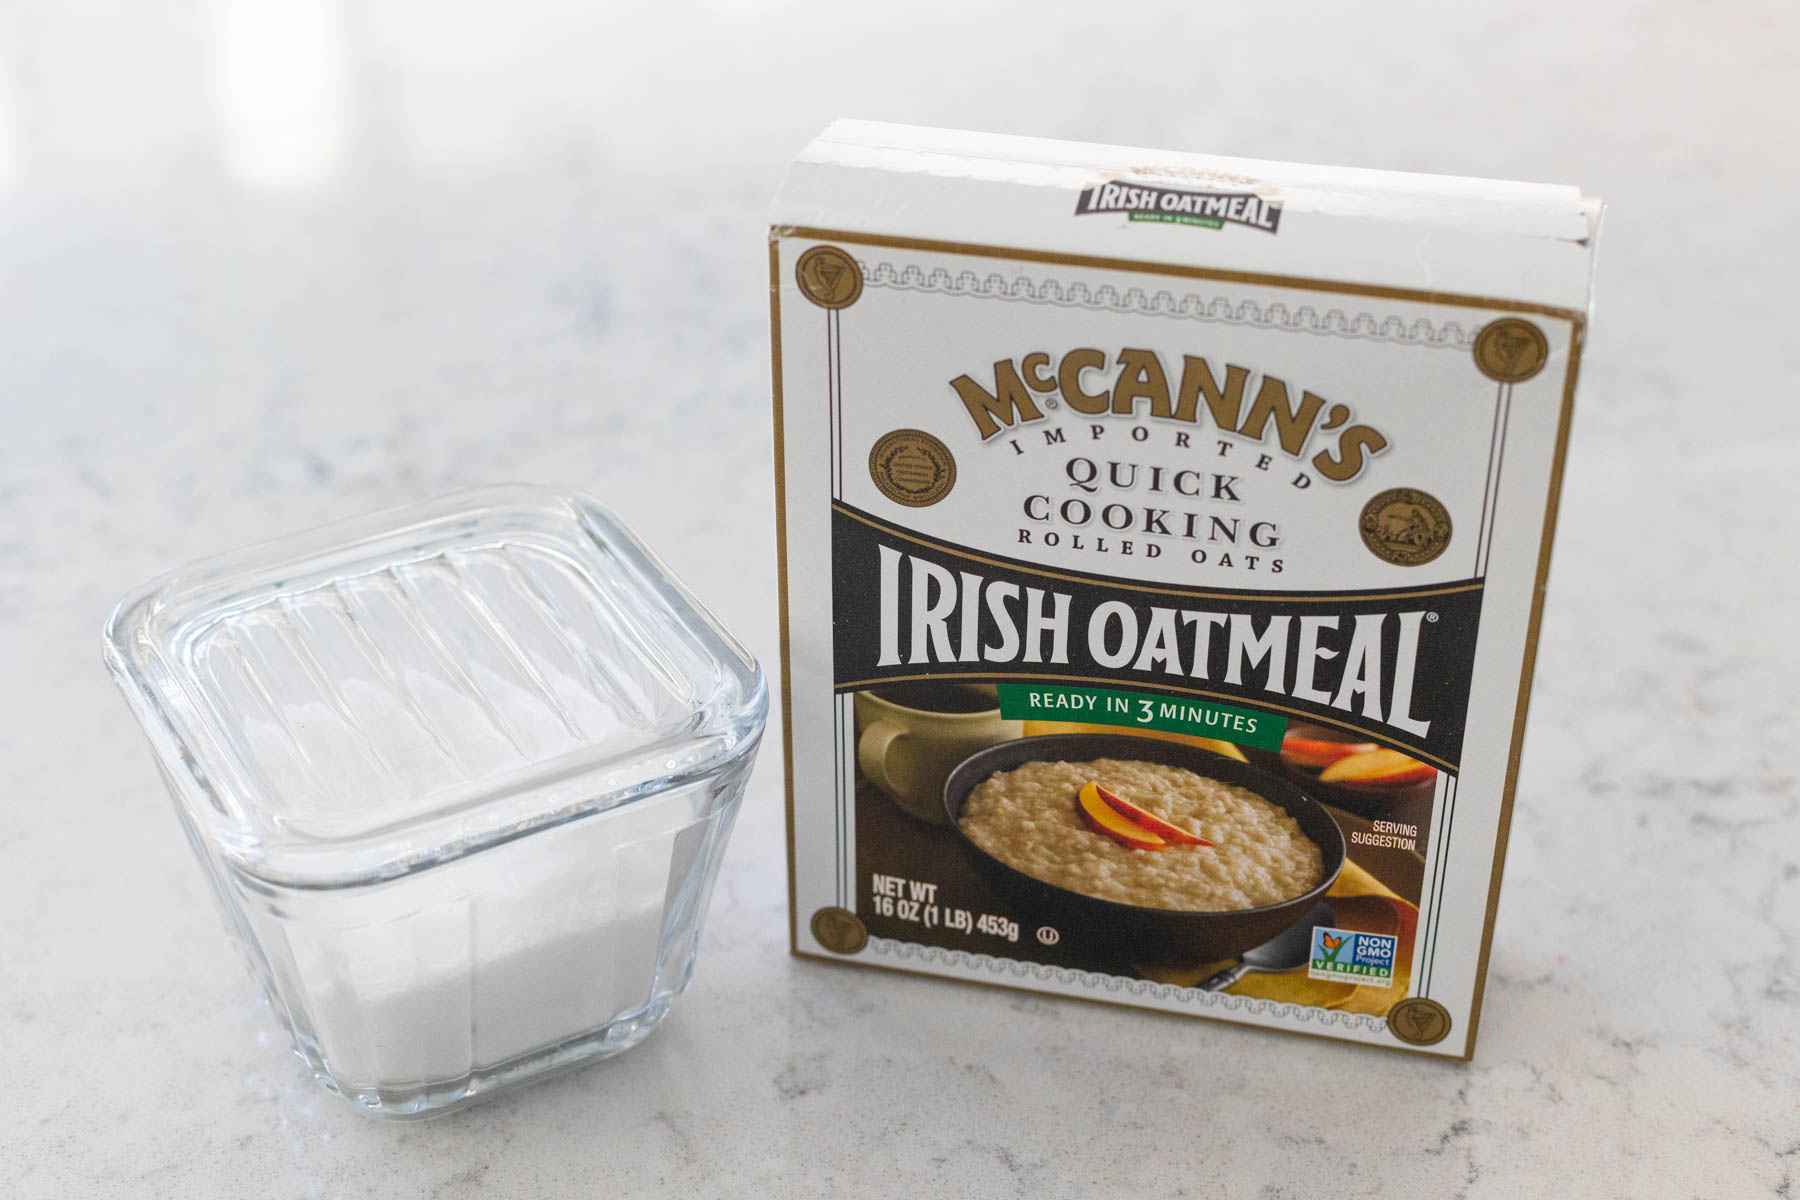 A box of Irish oatmeal next to a container of kosher salt.